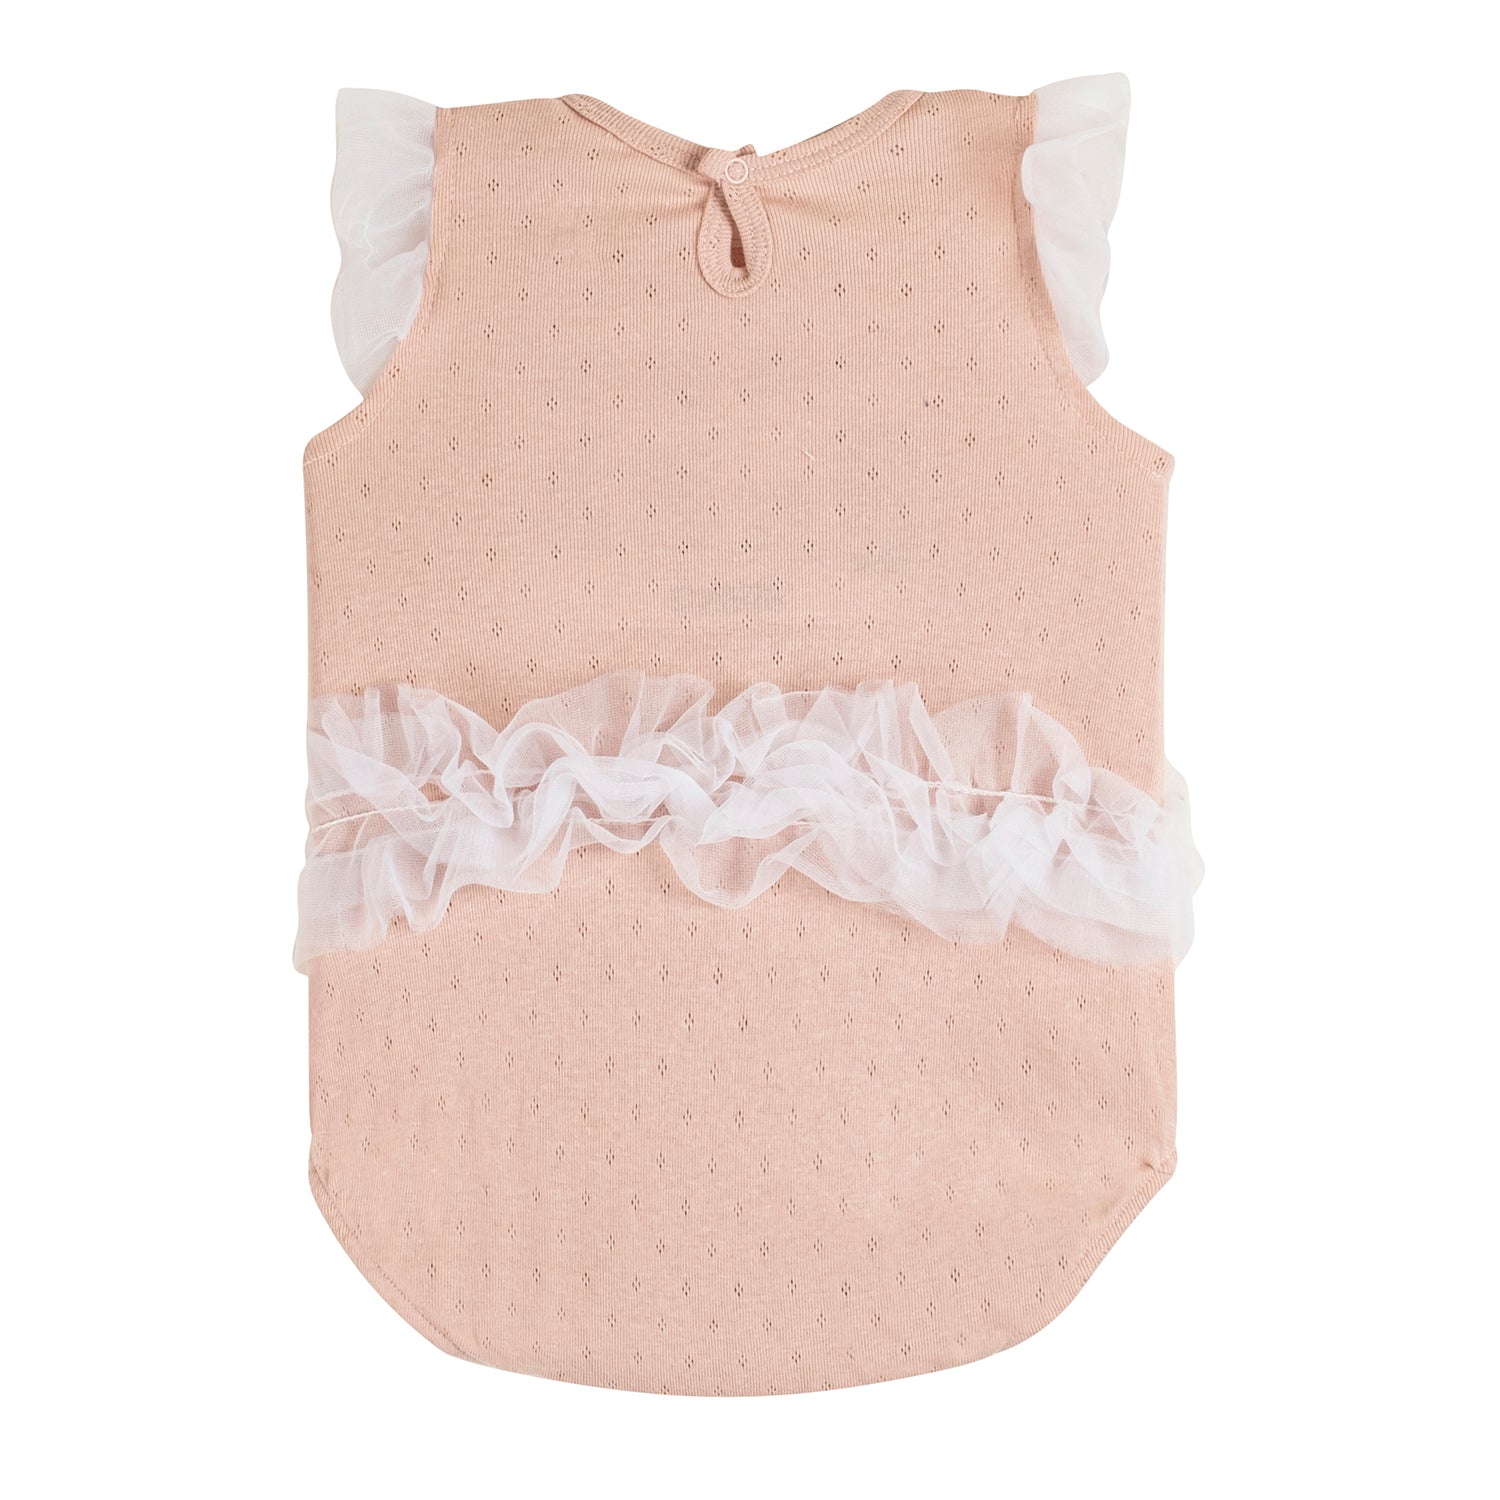 Baby Moo Little Frilly Princess Gift Set 3 Piece With Bodysuit, Socks And Headband - Peach